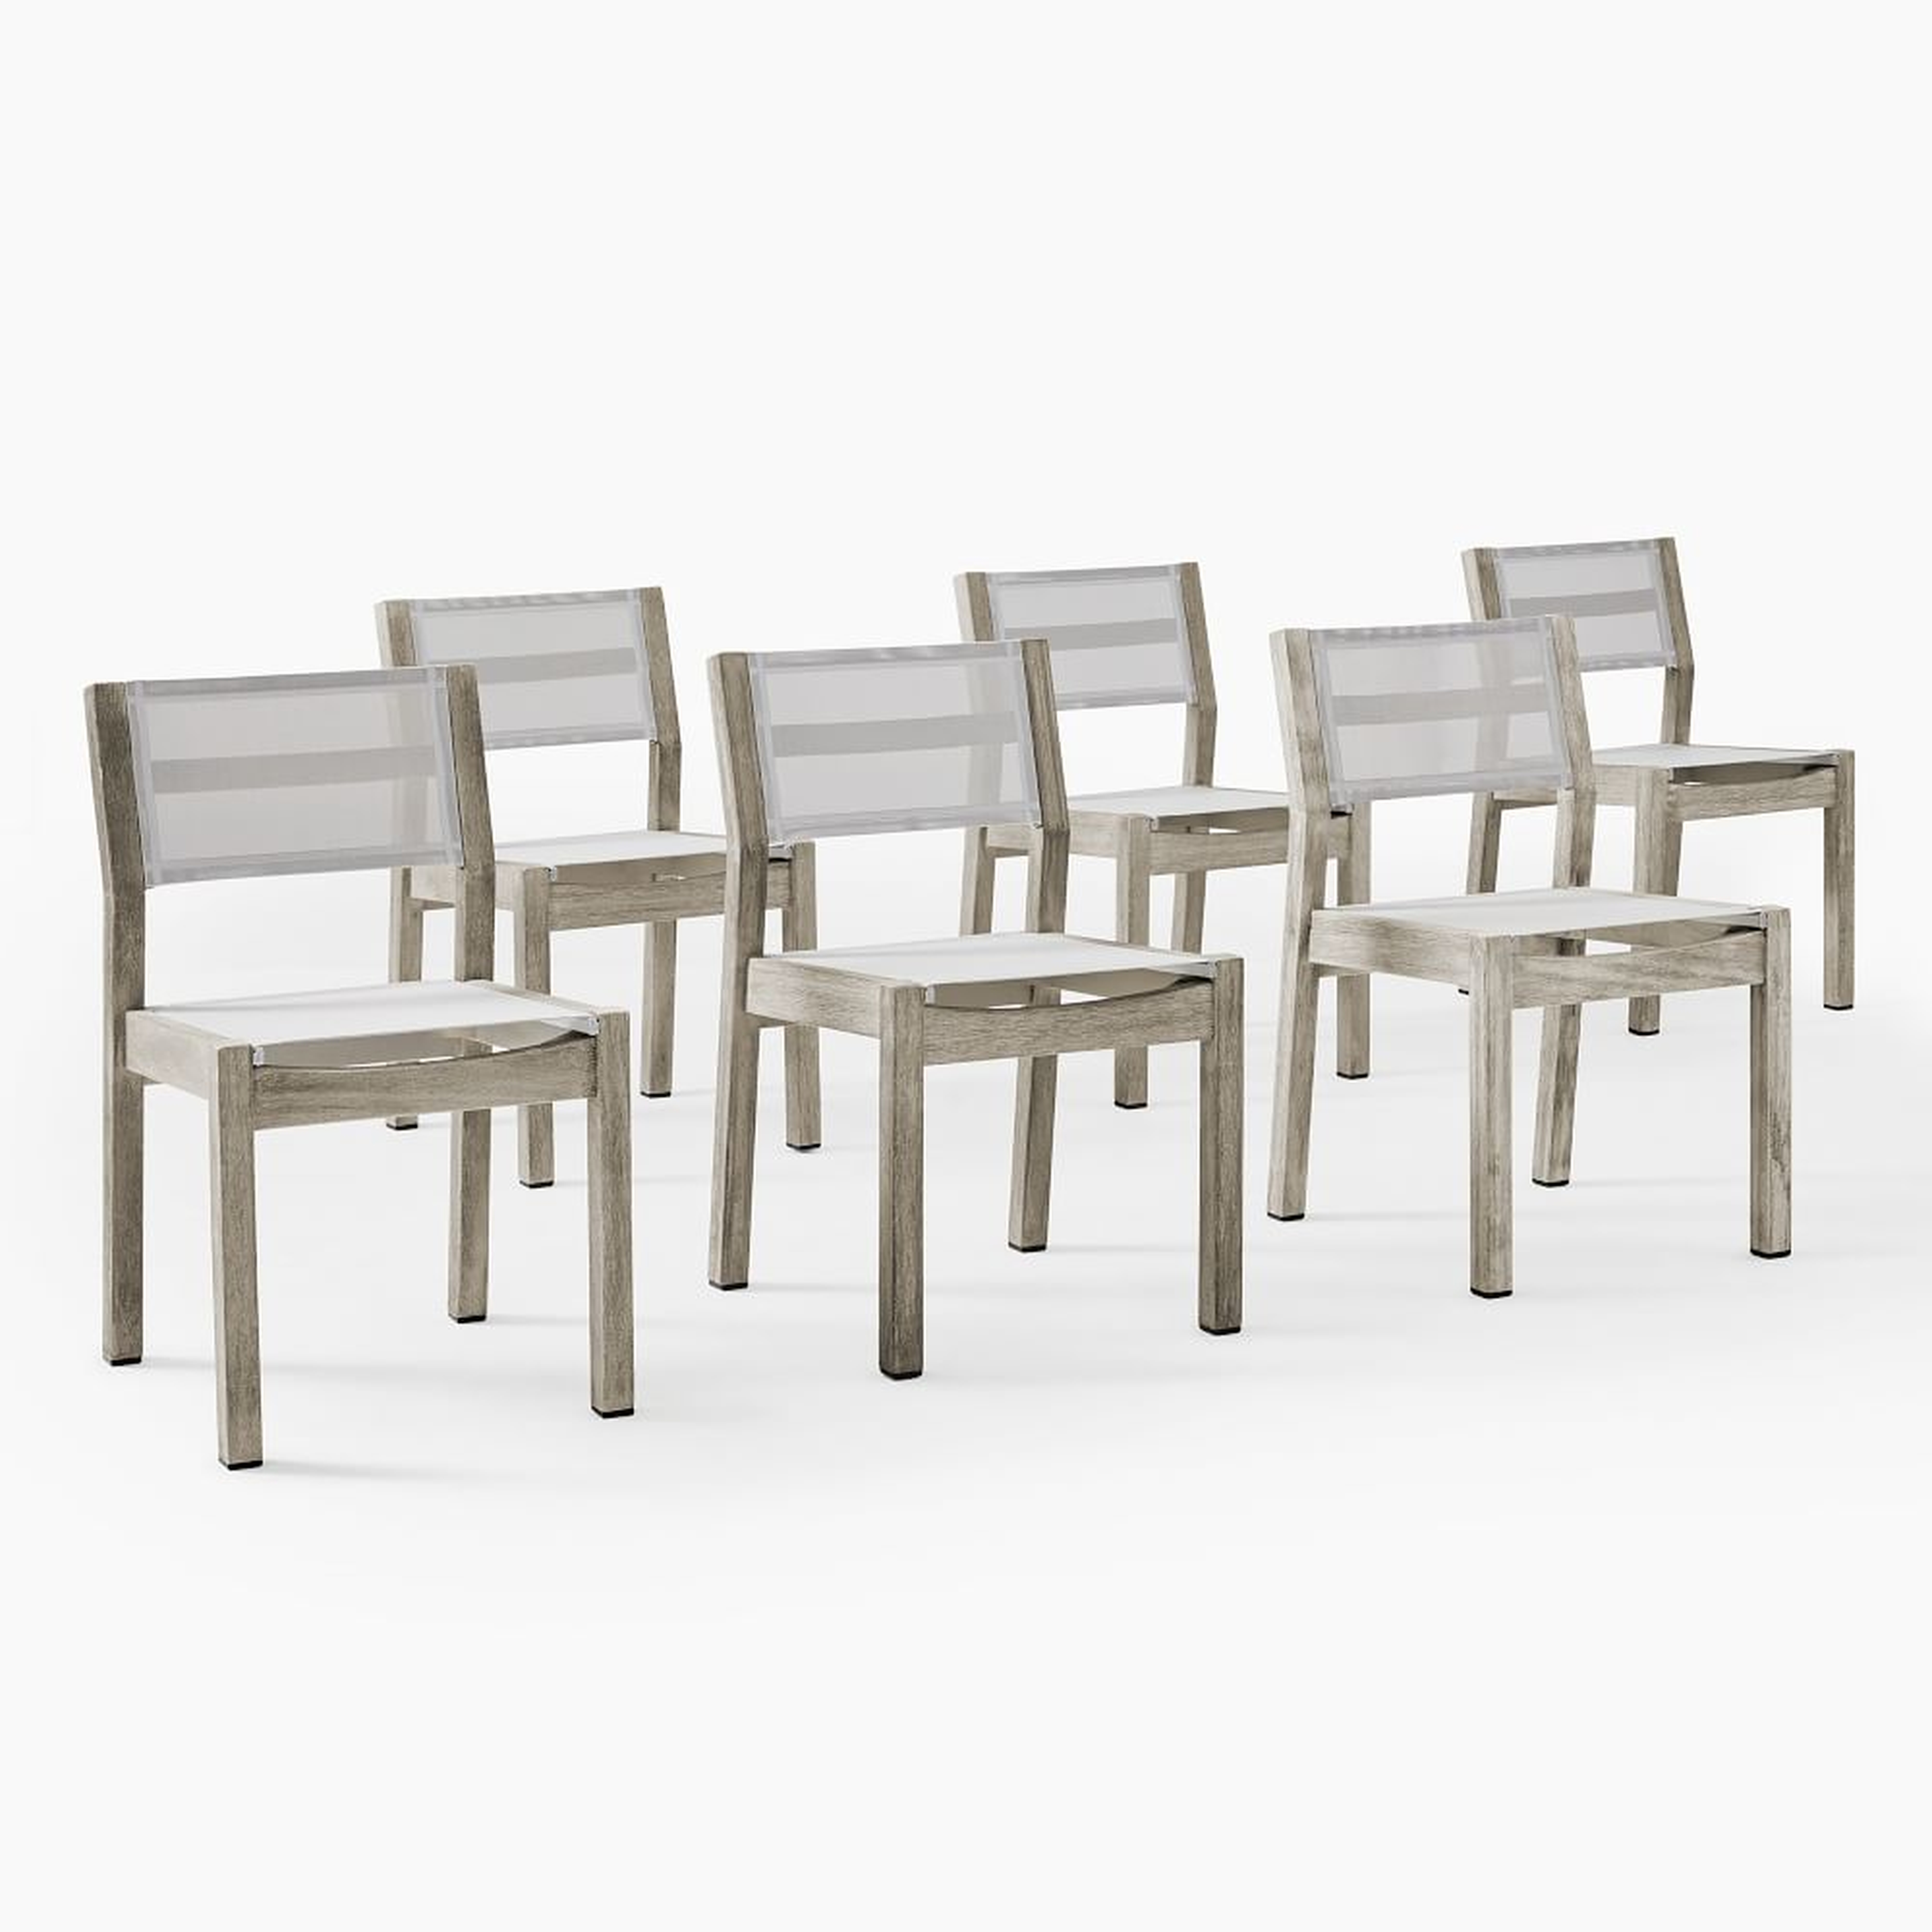 Portside Textiline Dining Chair, Set of 6, Weathered Gray - West Elm